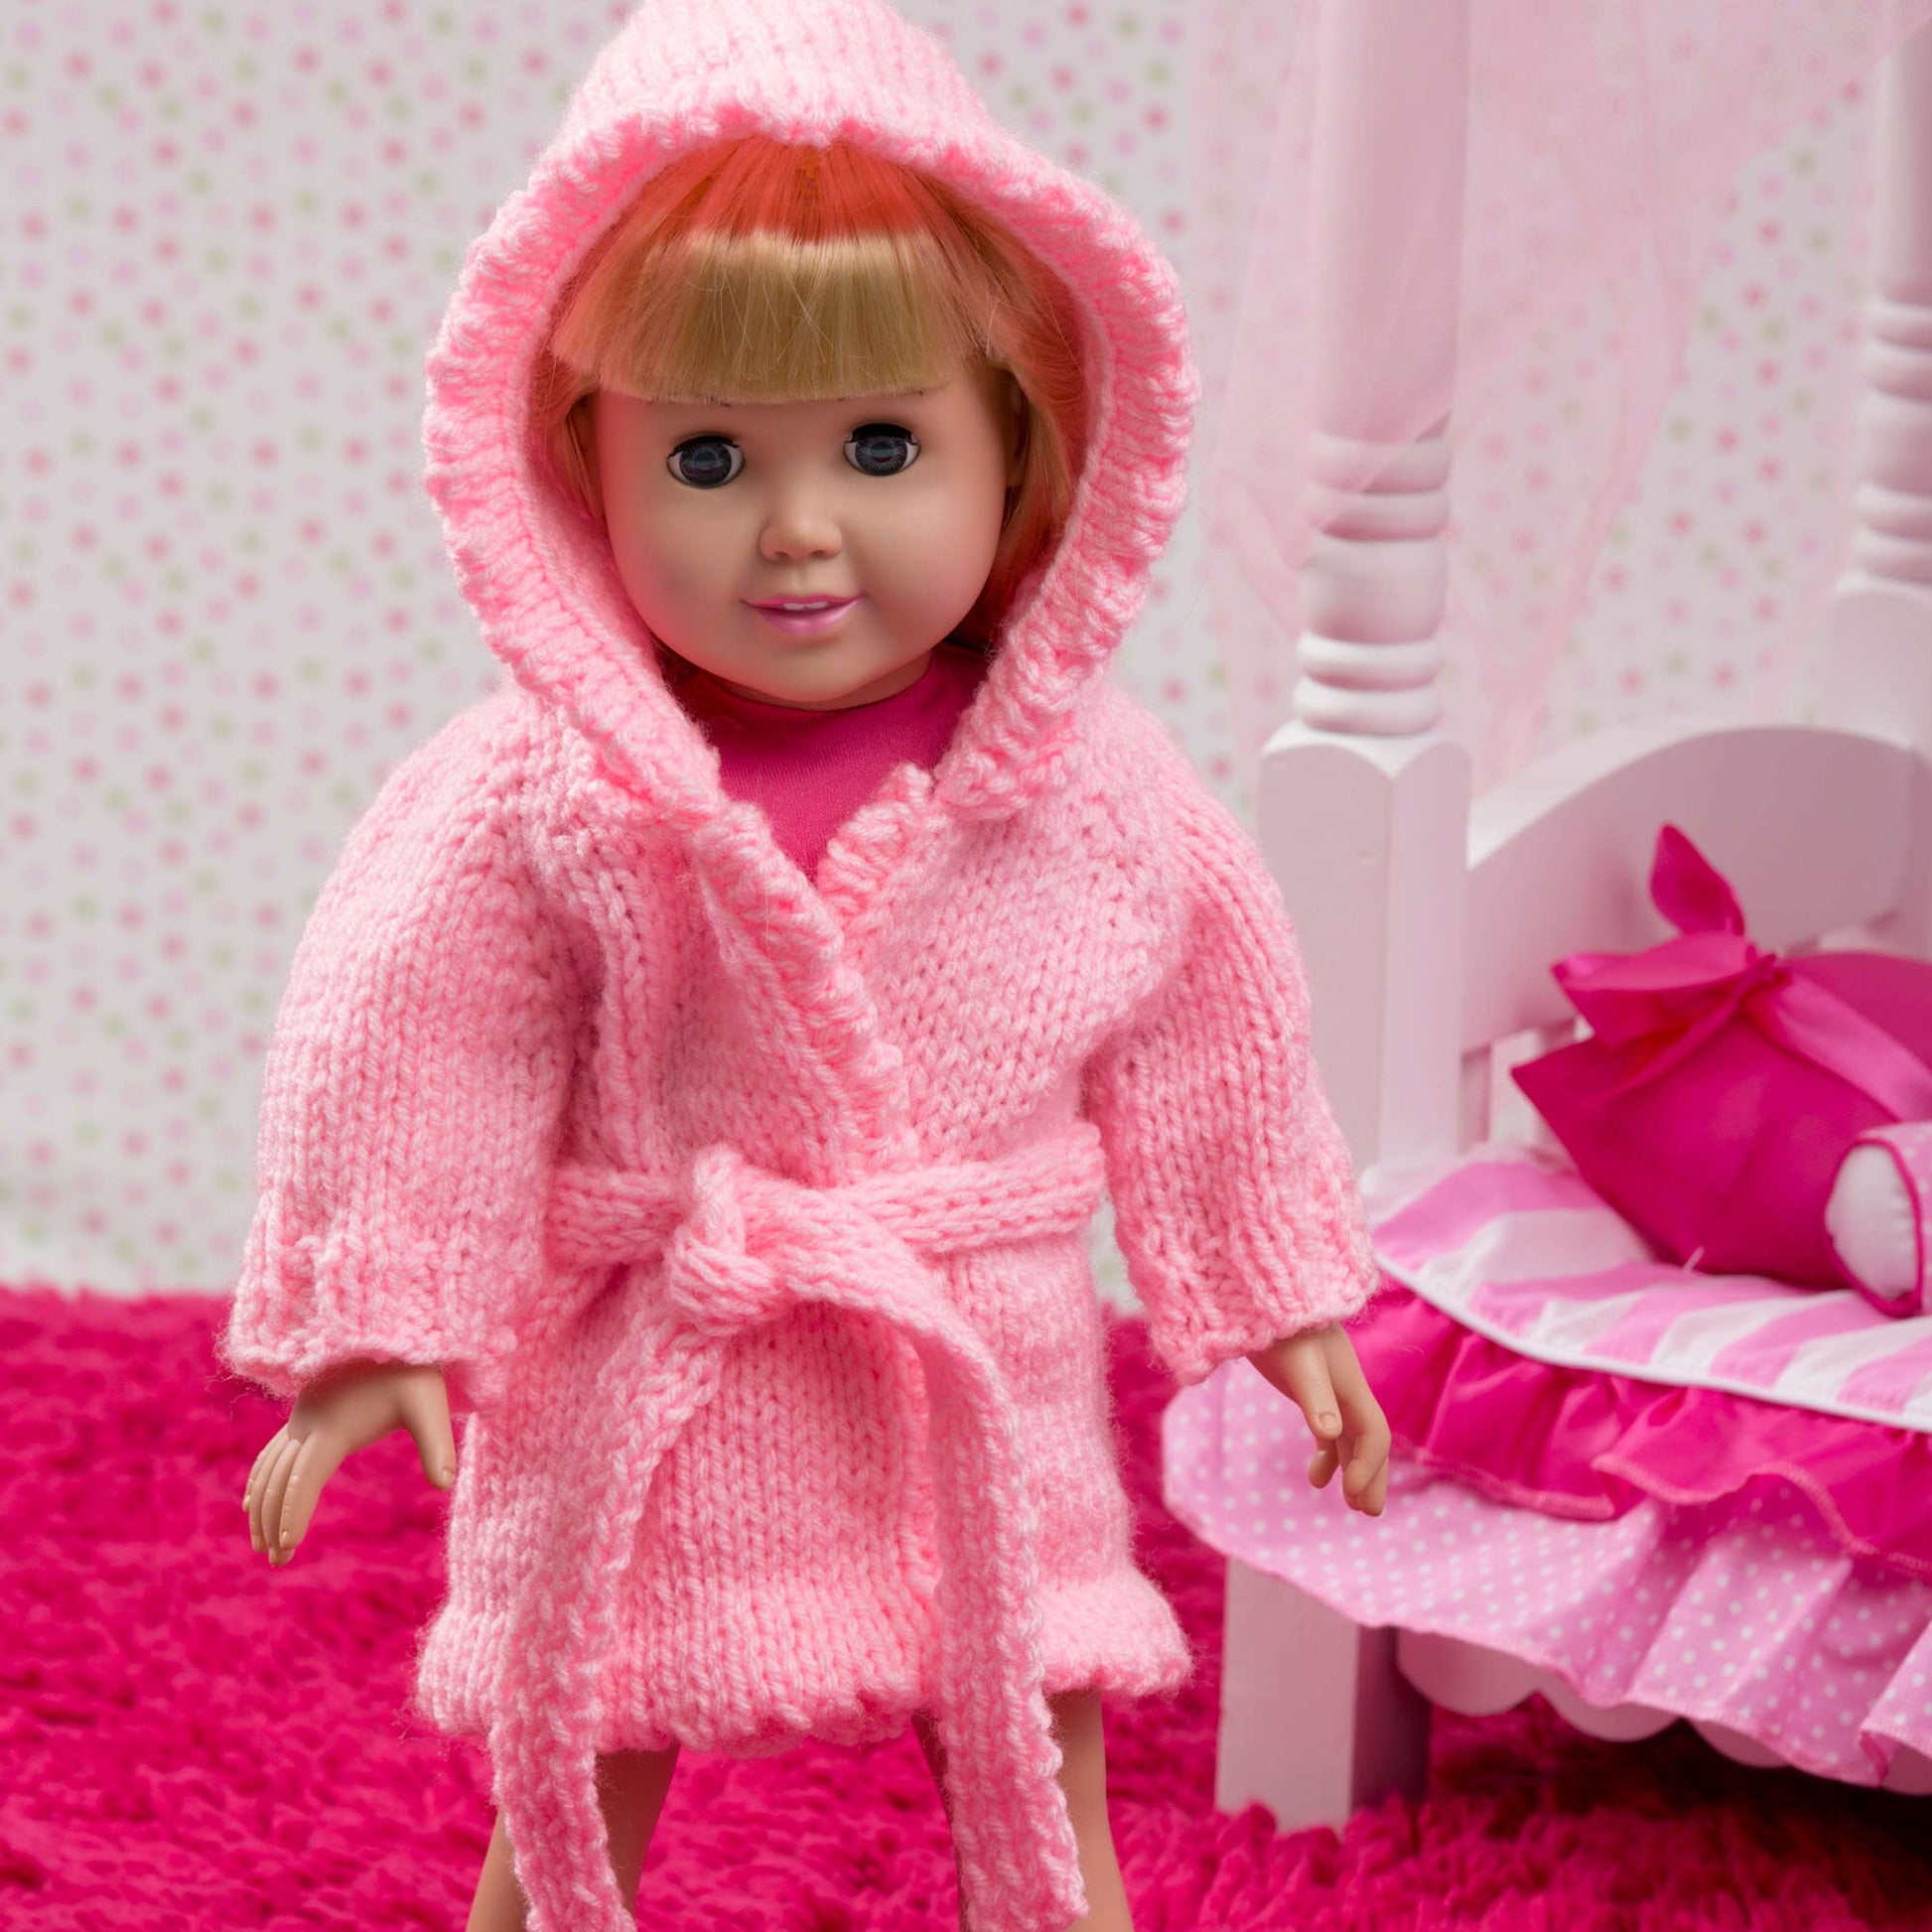 Free Red Heart Doll Robe And Bunny Slippers Knit Pattern